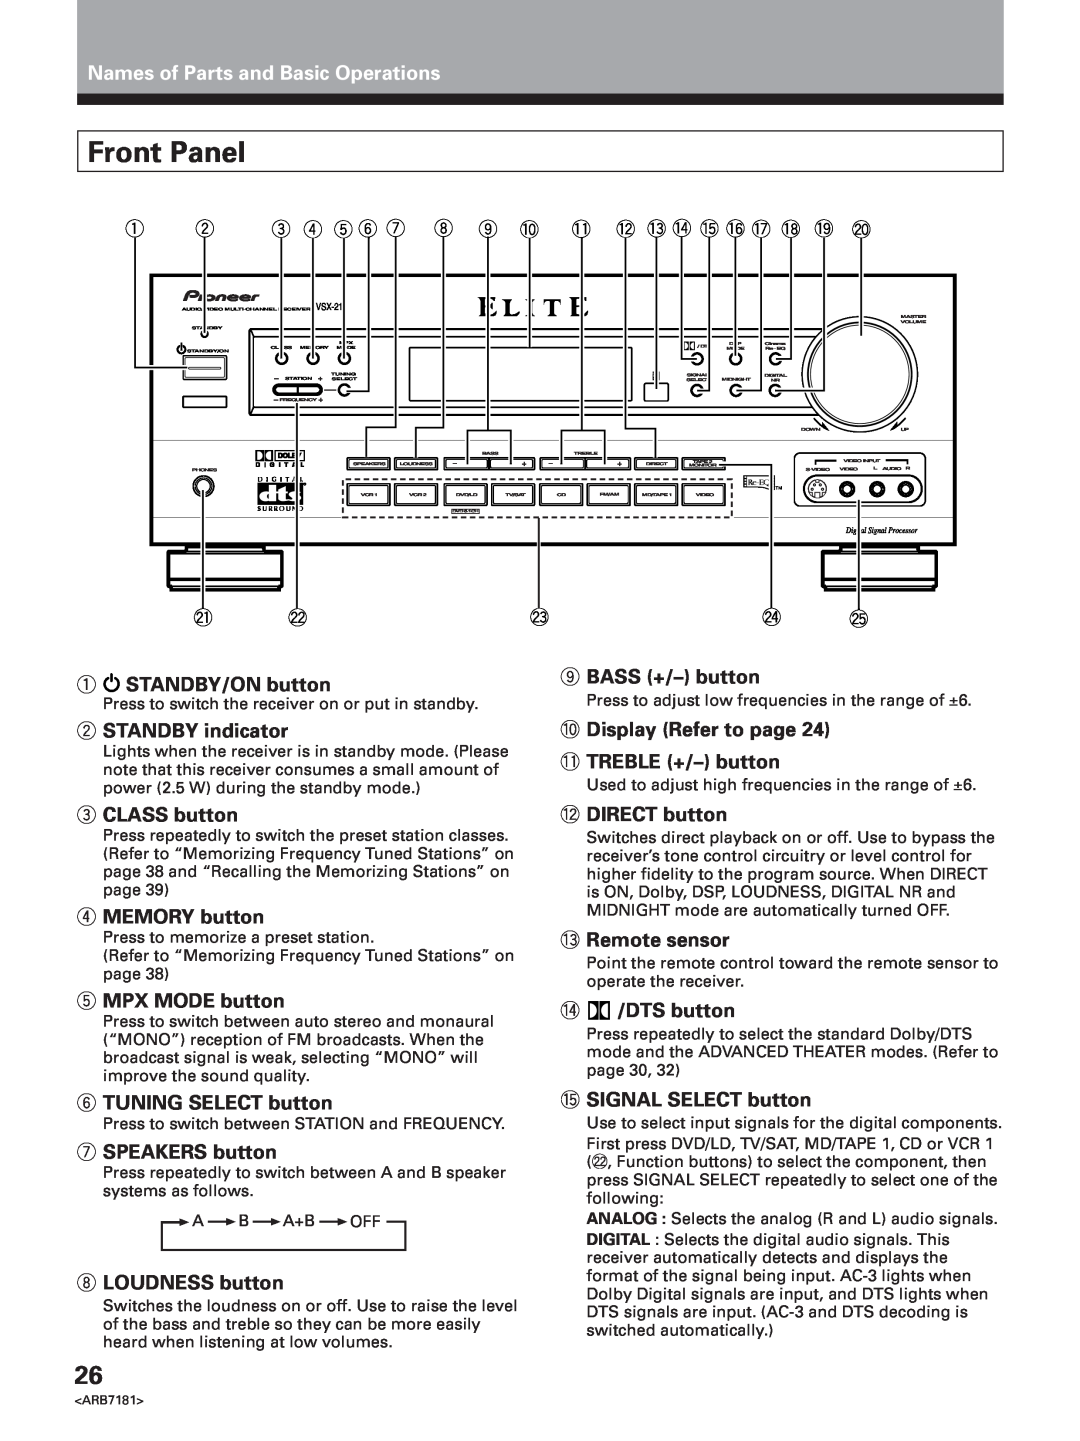 Pioneer VSX-21 manual Front Panel, Names of Parts and Basic Operations 